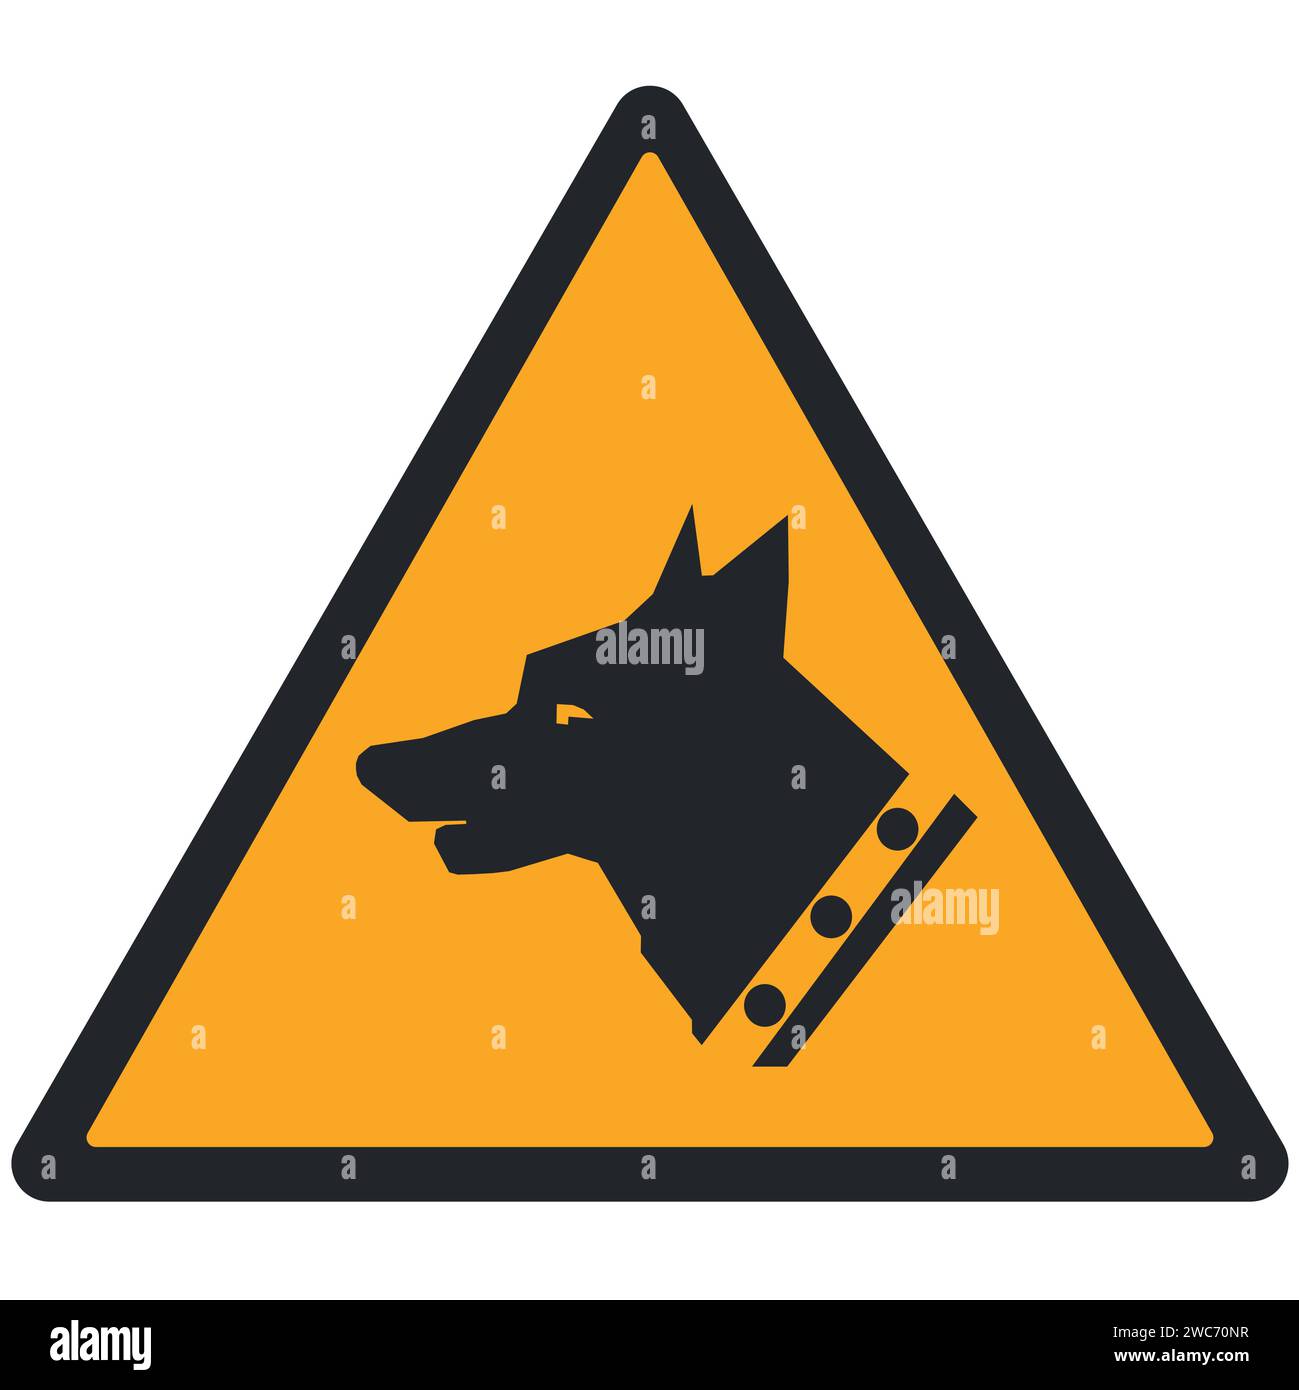 WARNING PICTOGRAM, GUARDIAN ISO 7010 - W013 Stock Vector